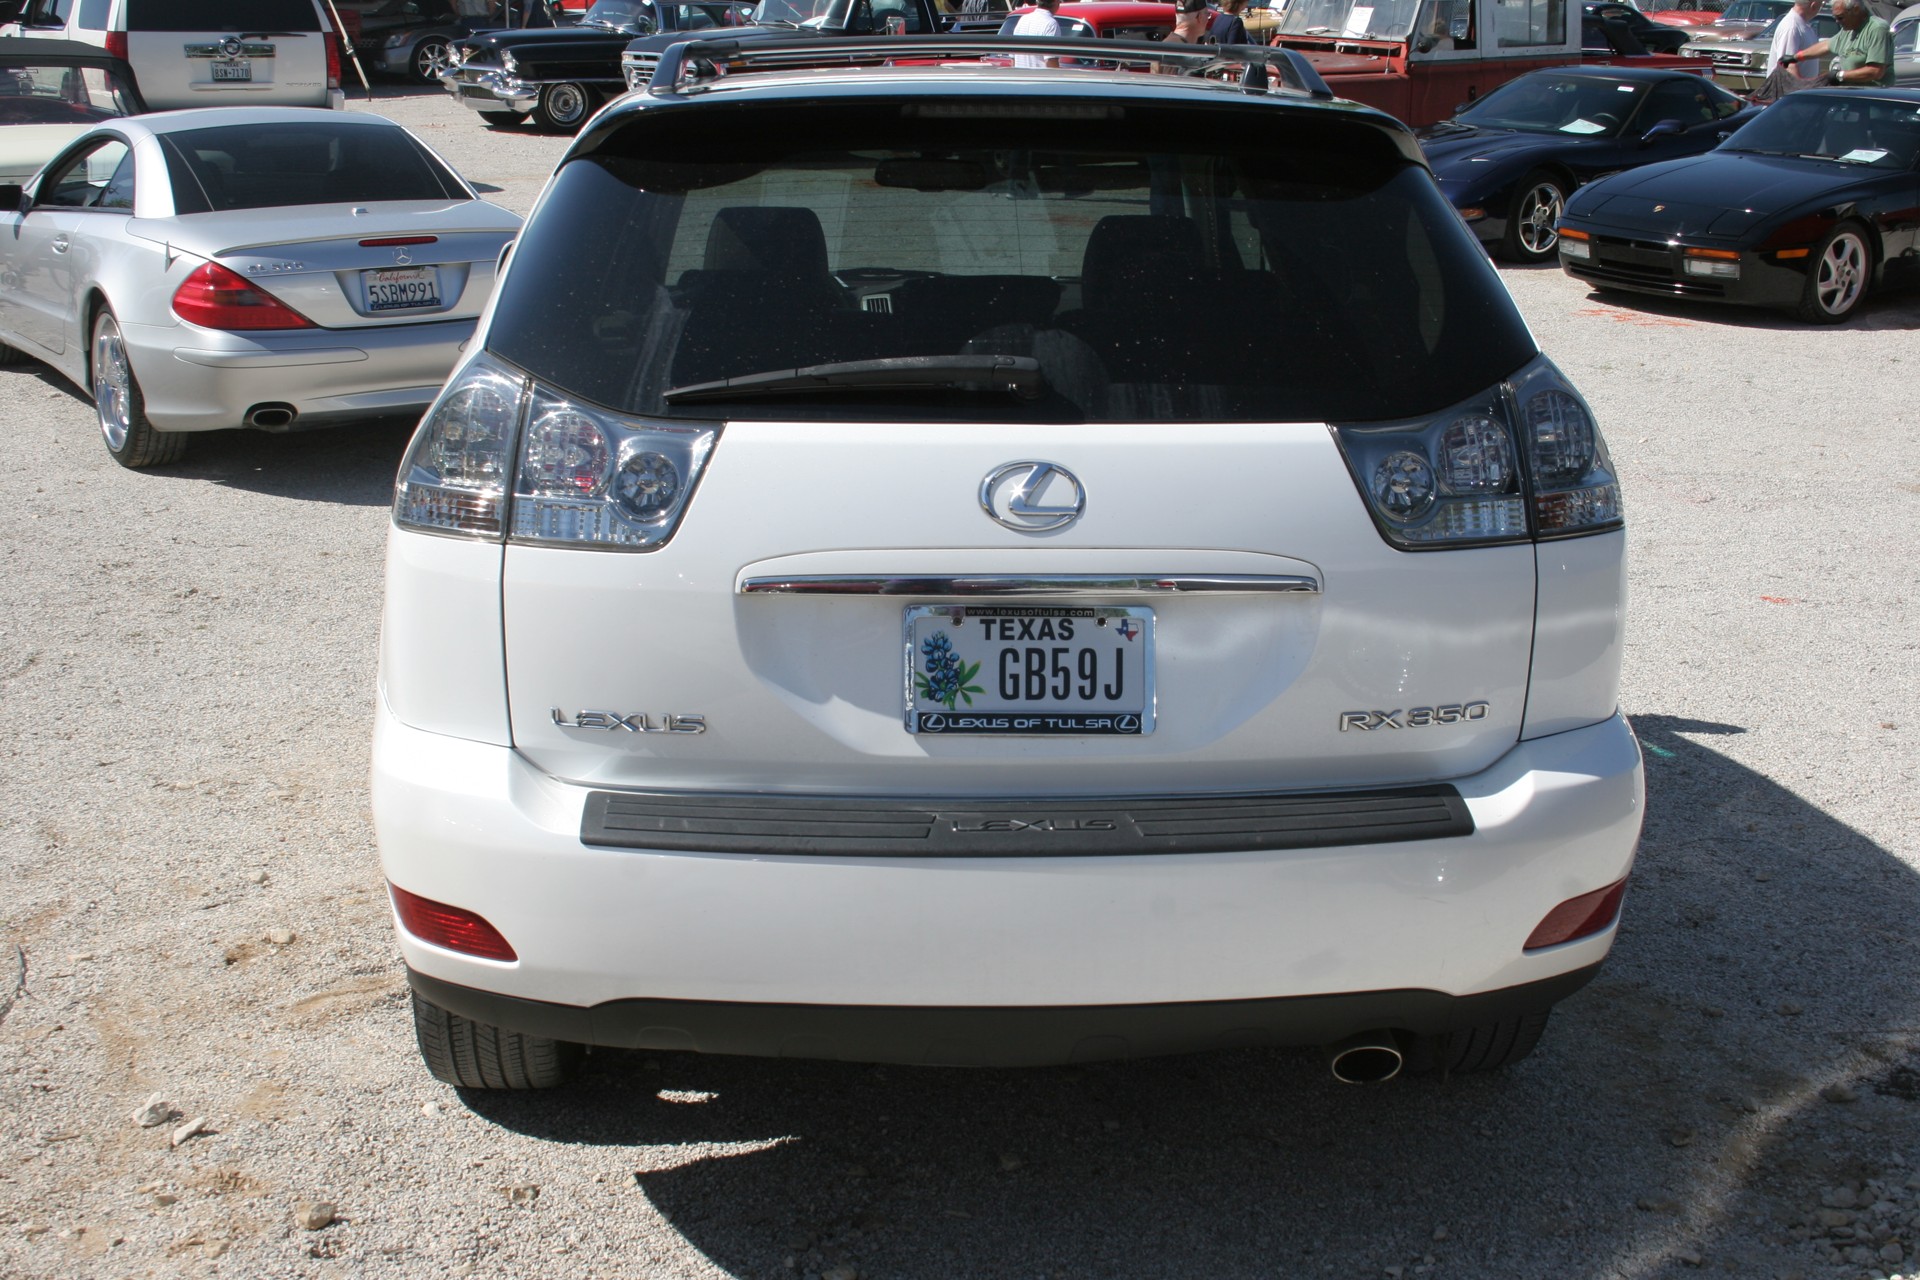 3rd Image of a 2008 LEXUS RX350 SUV